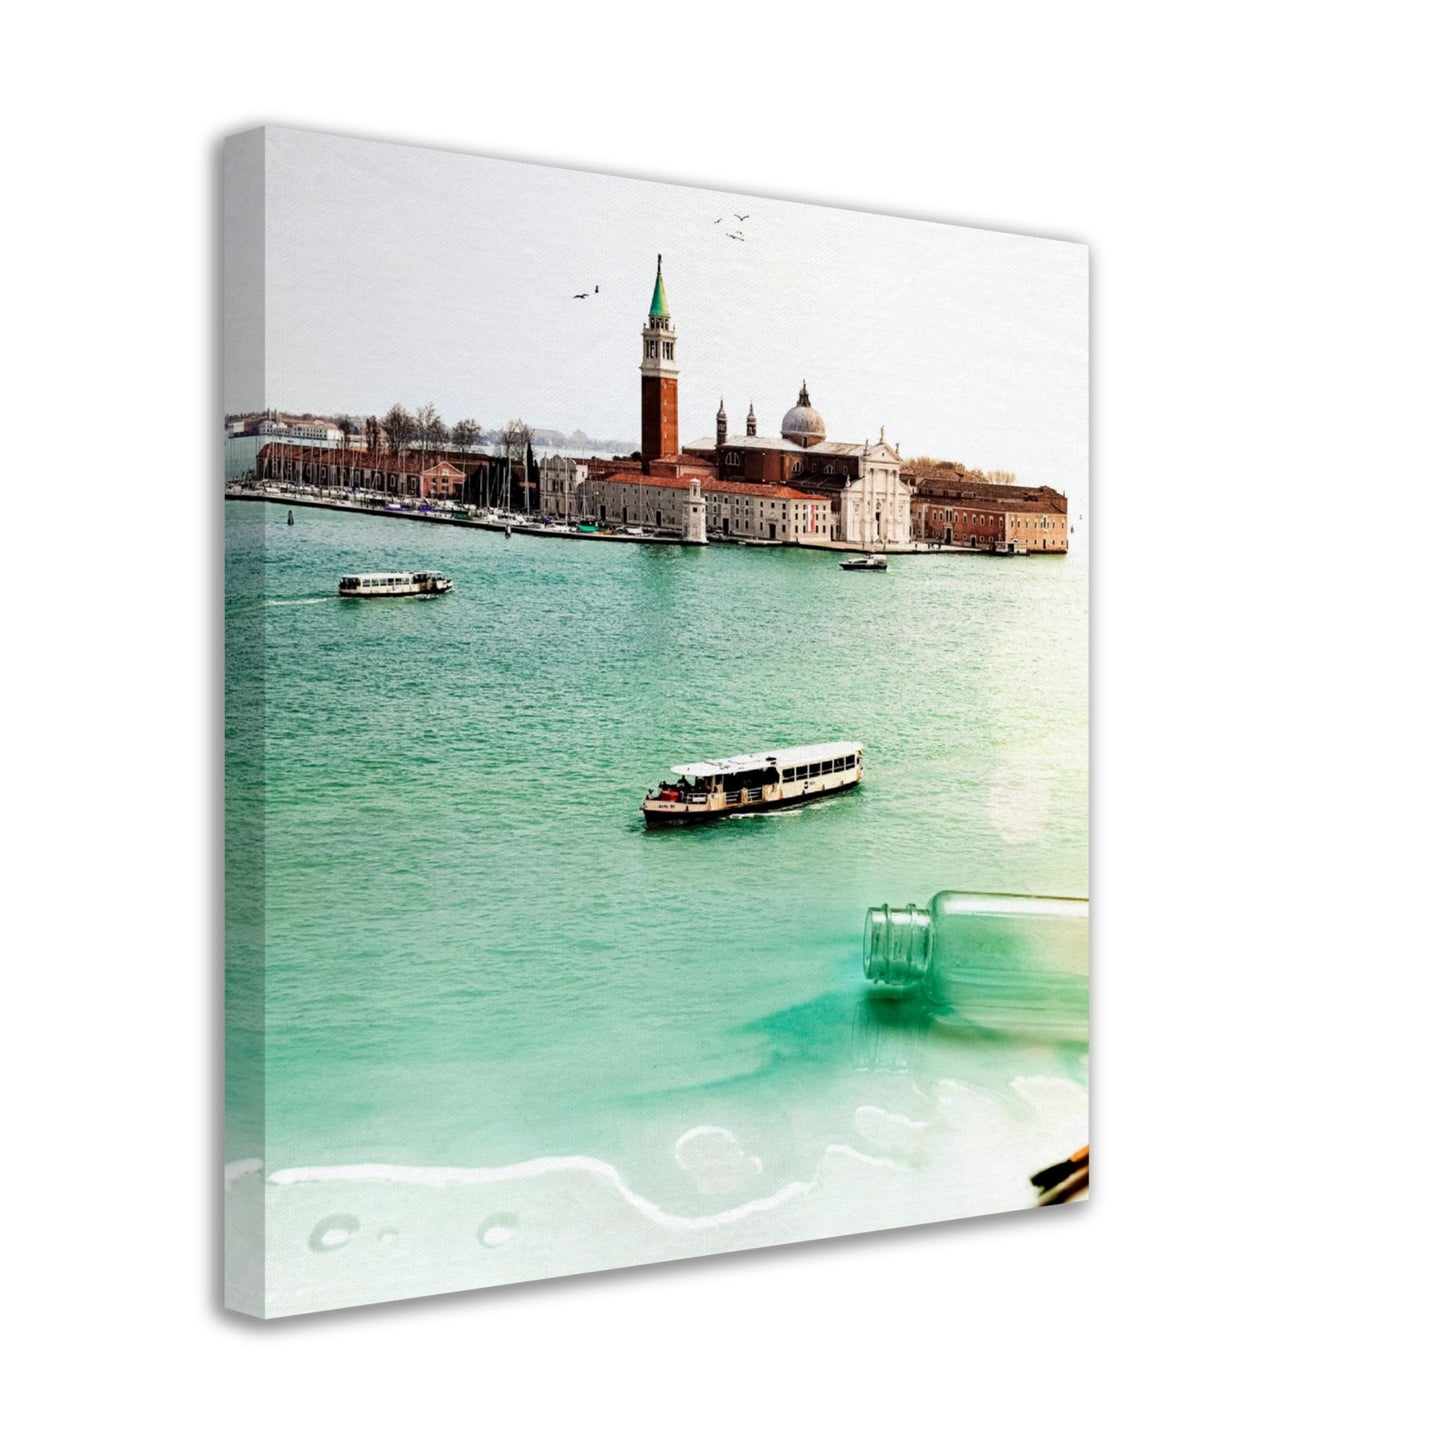 Venice In A Bottle - Canvas Print